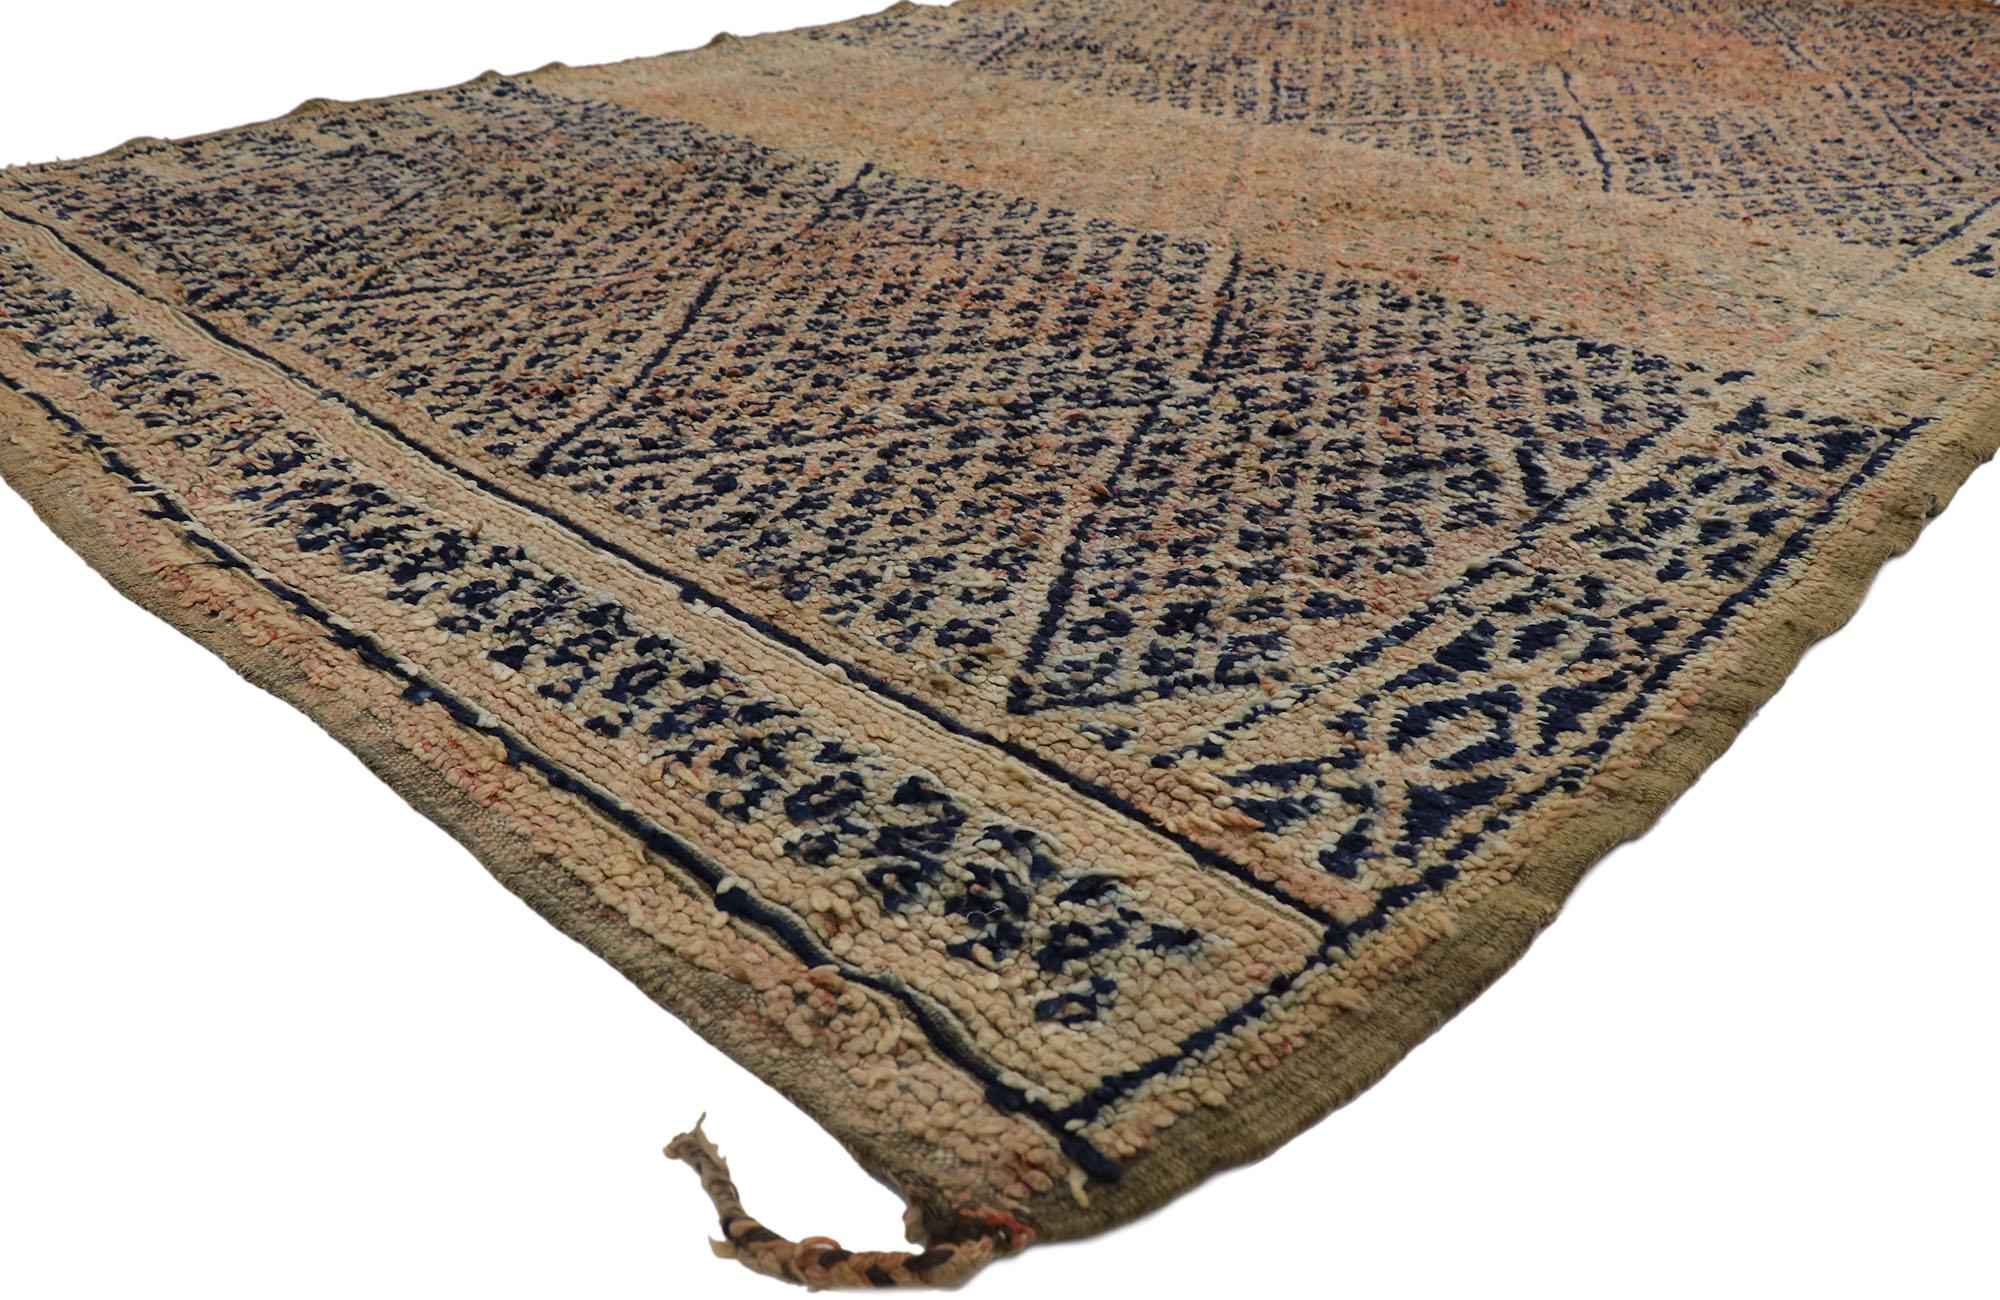 21302 Vintage Berber Zayane Moroccan rug with Bohemian Style 07'06 x 12'11. Showcasing an expressive design with rustic sensibility, incredible detail and texture, this hand knotted wool vintage Berber Zayane Moroccan rug is a captivating vision of